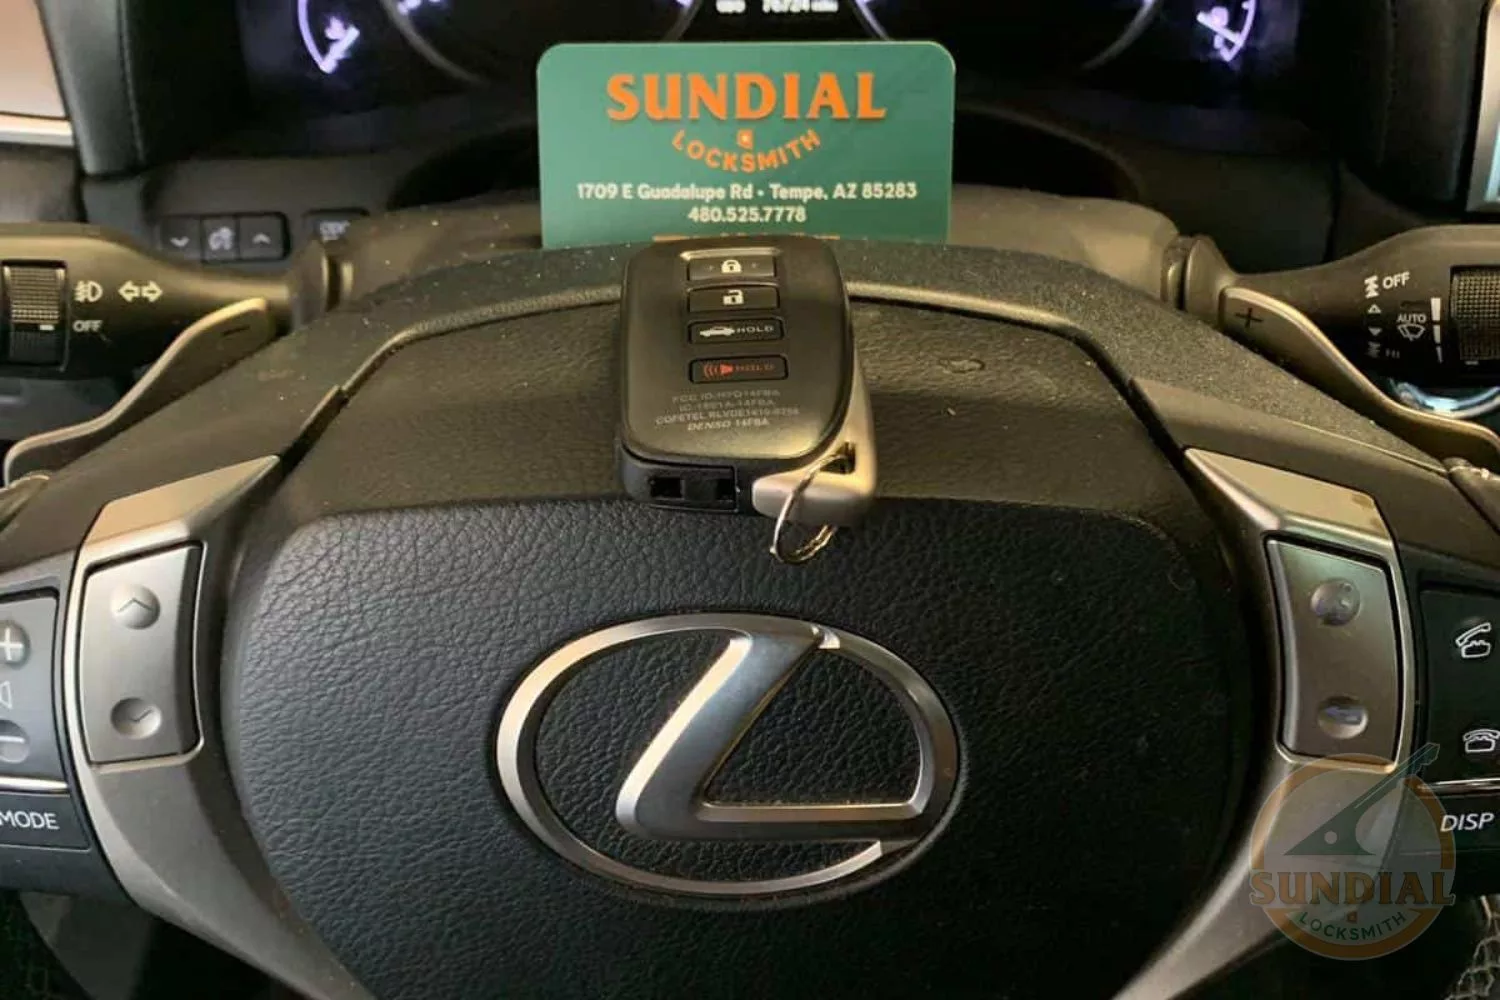 A Lexus car key placed on the steering wheel, with a Sundial Locksmith business card propped behind it.